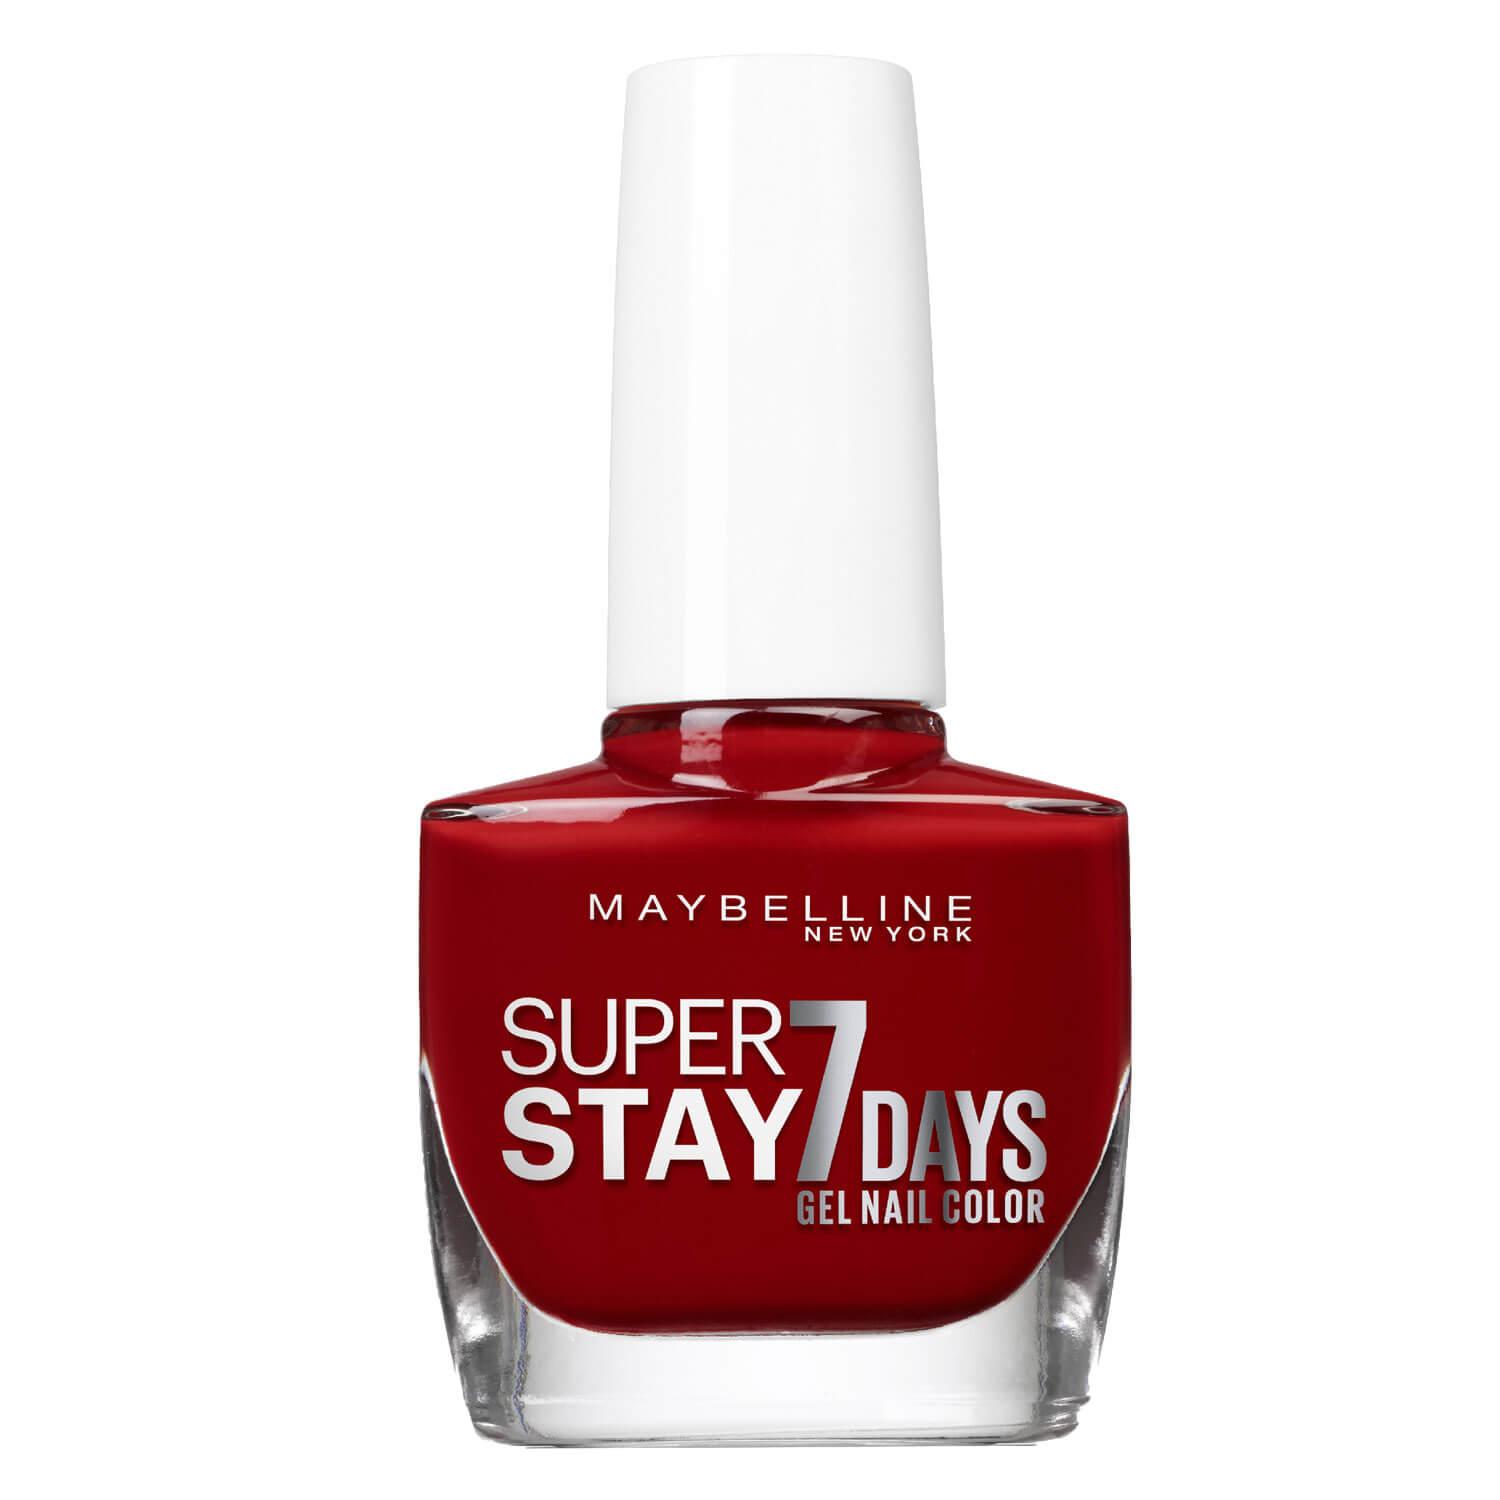 Maybelline NY Nails - Super Stay 7 Days Nagellack Nr. 06 Deep Red